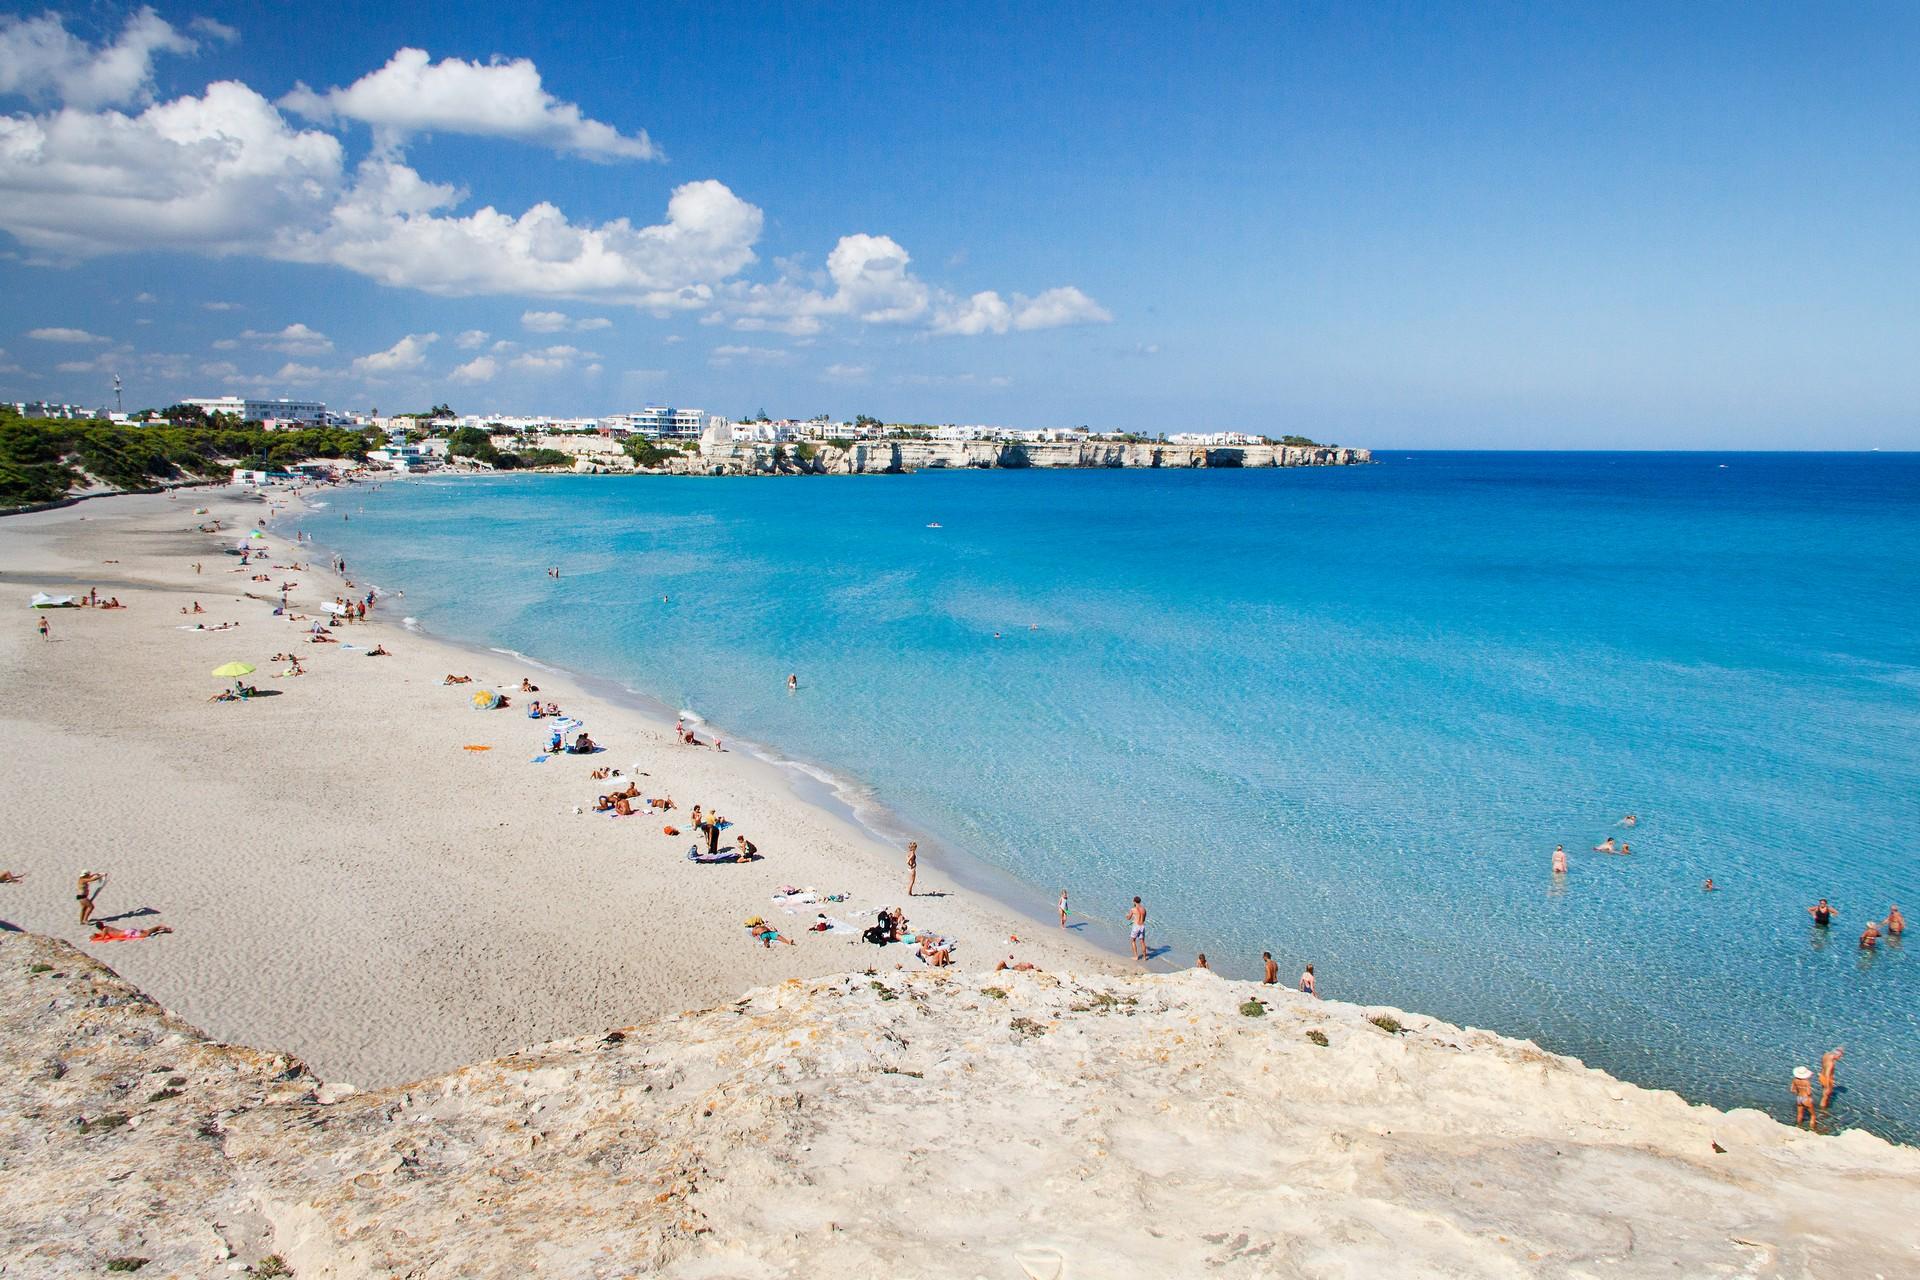 Beach and port in Torre dell'Orso on a sunny day with some clouds